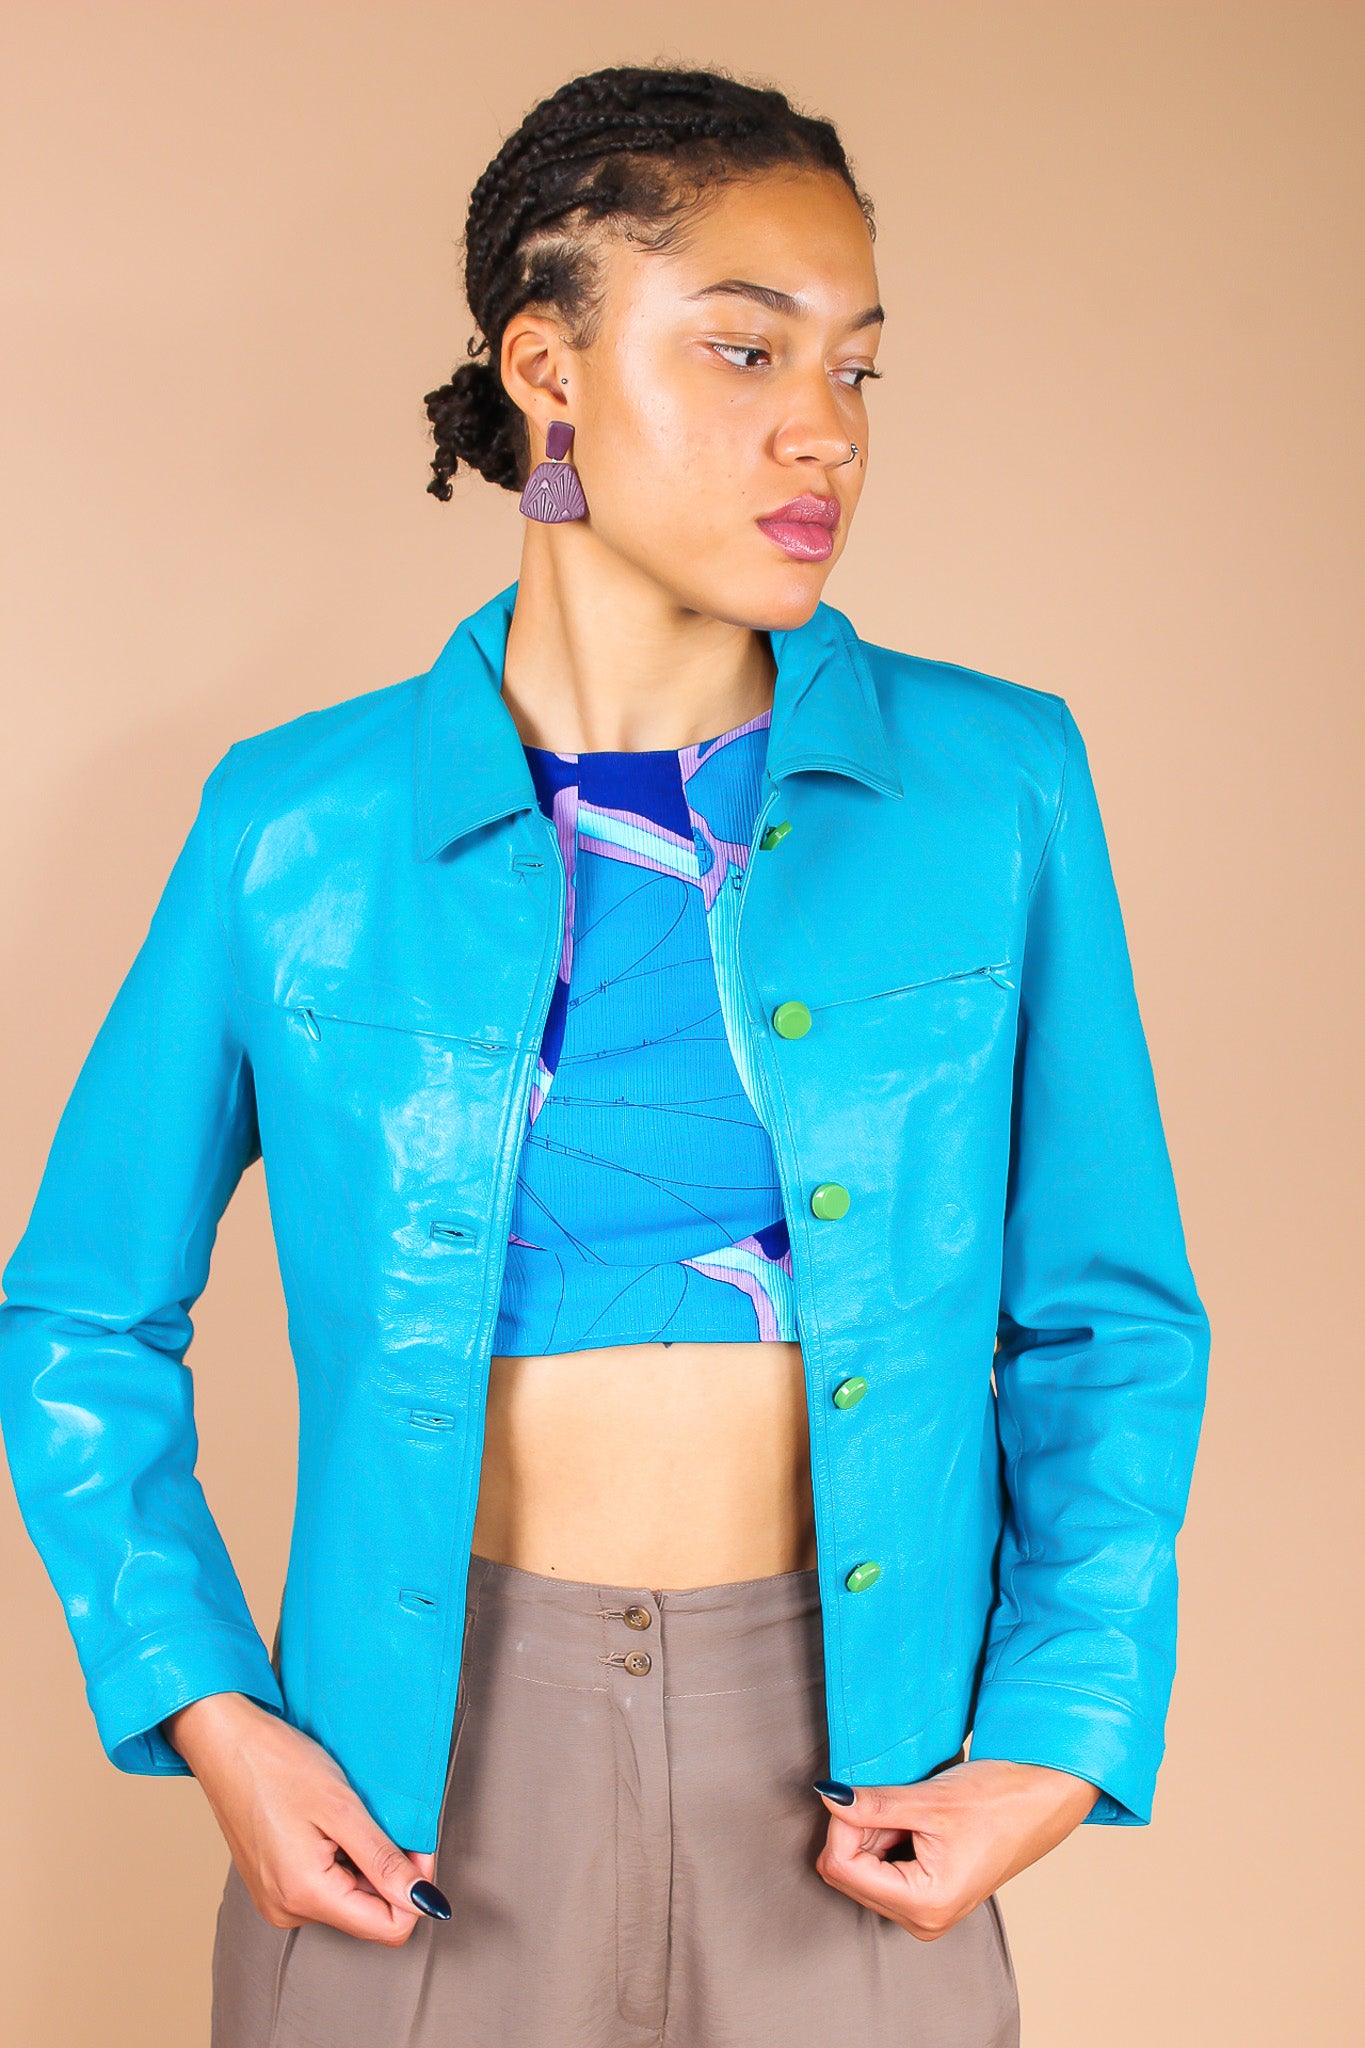 Redesigned Teal Leather Jacket Size M